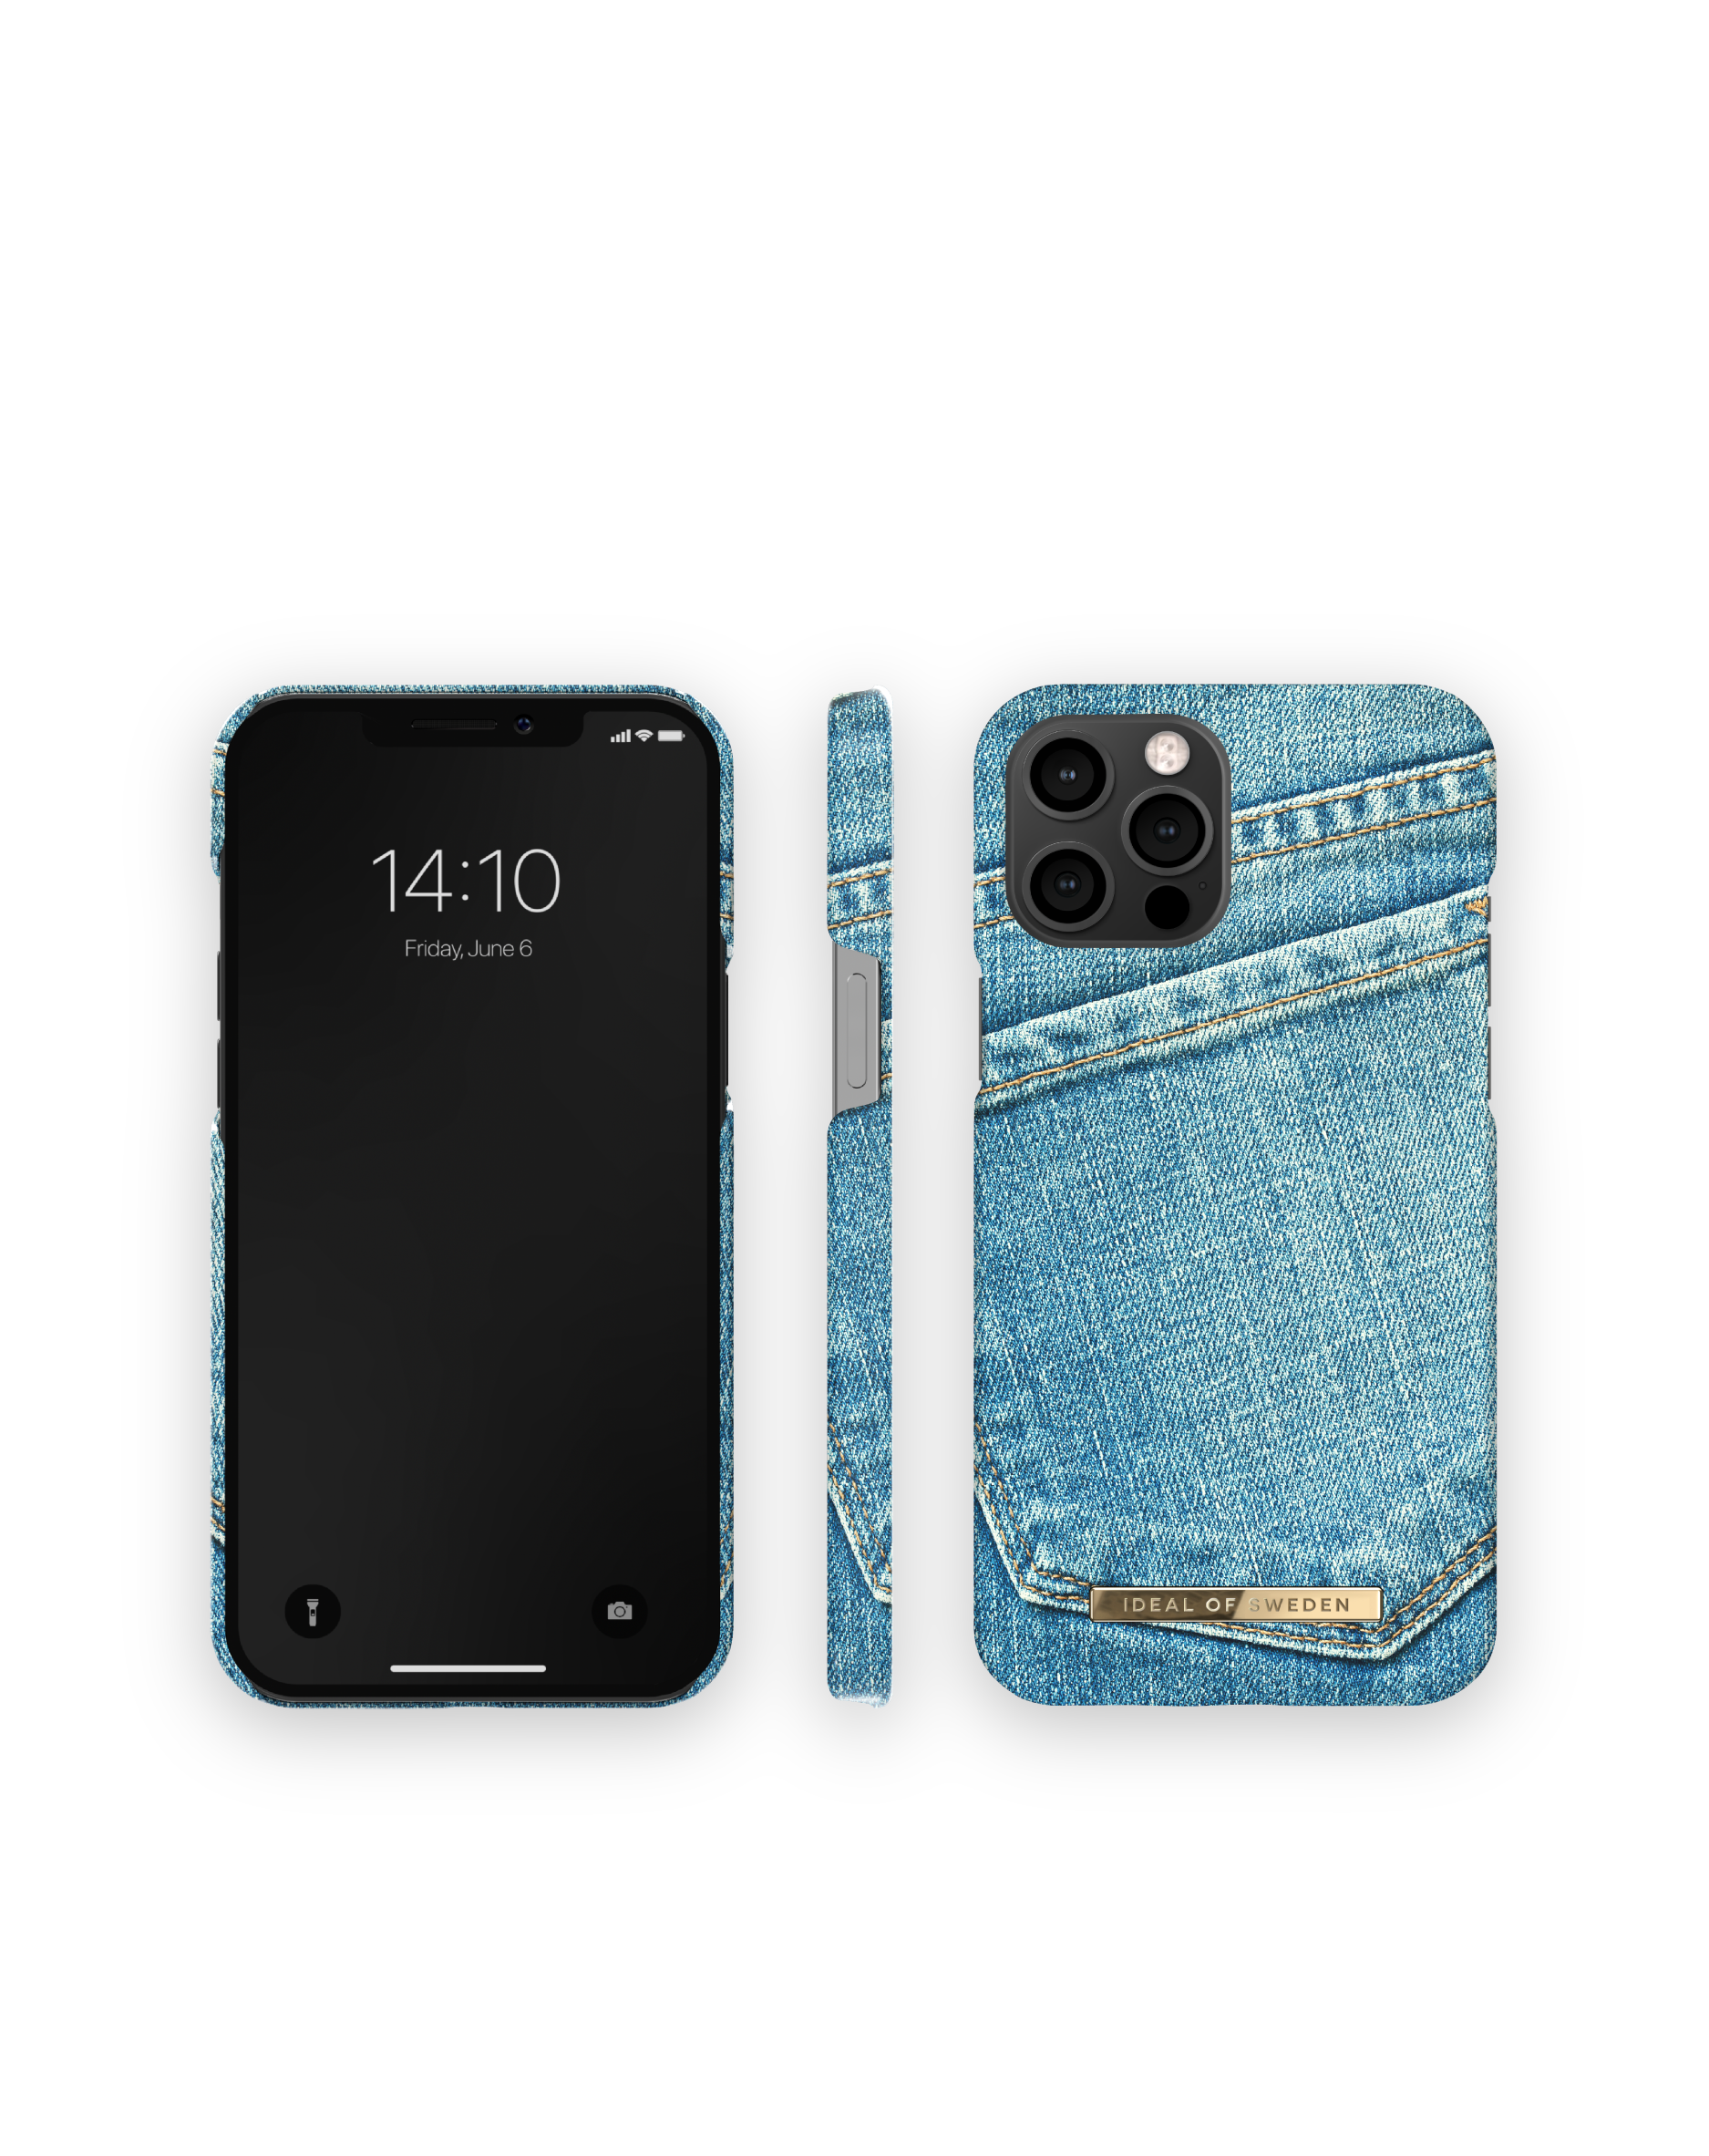 Apple, Bliss Backcover, OF (Ltd) iPhone 12 Pro IDFCSS22-I2067-413, Max, IDEAL Denim SWEDEN